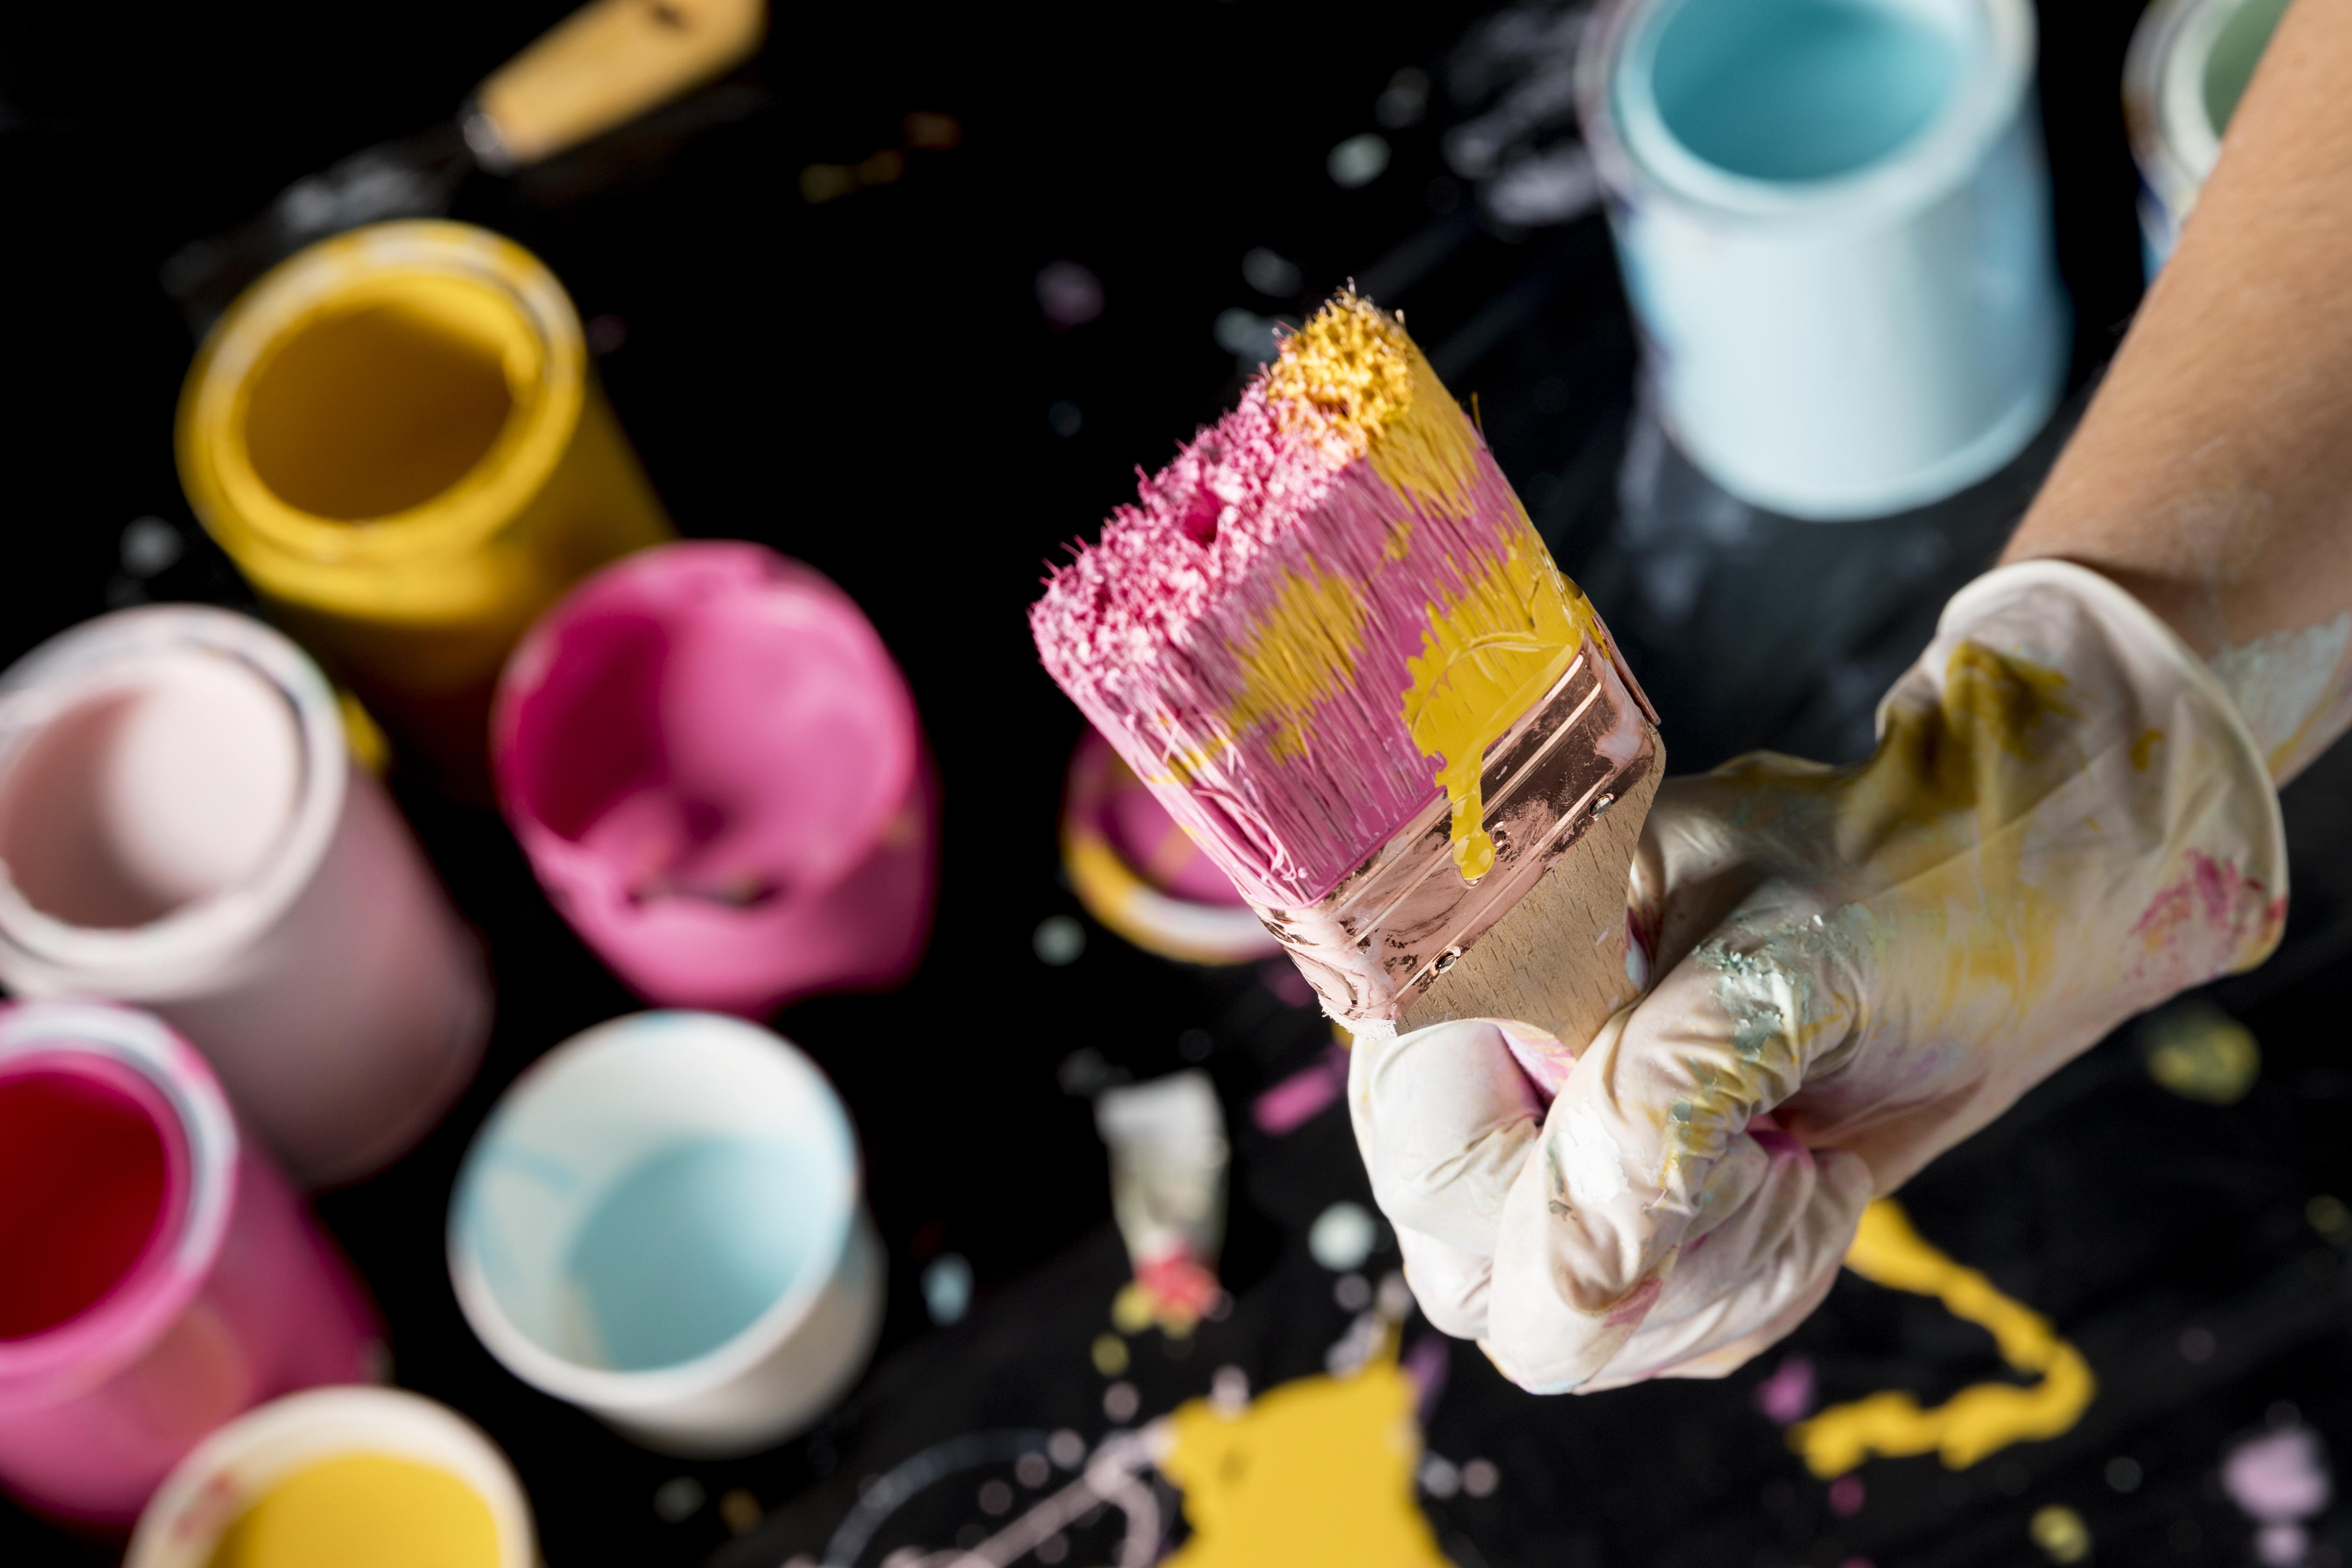 Growing investment in the paints business to drive the competitive landscape in the Indian market